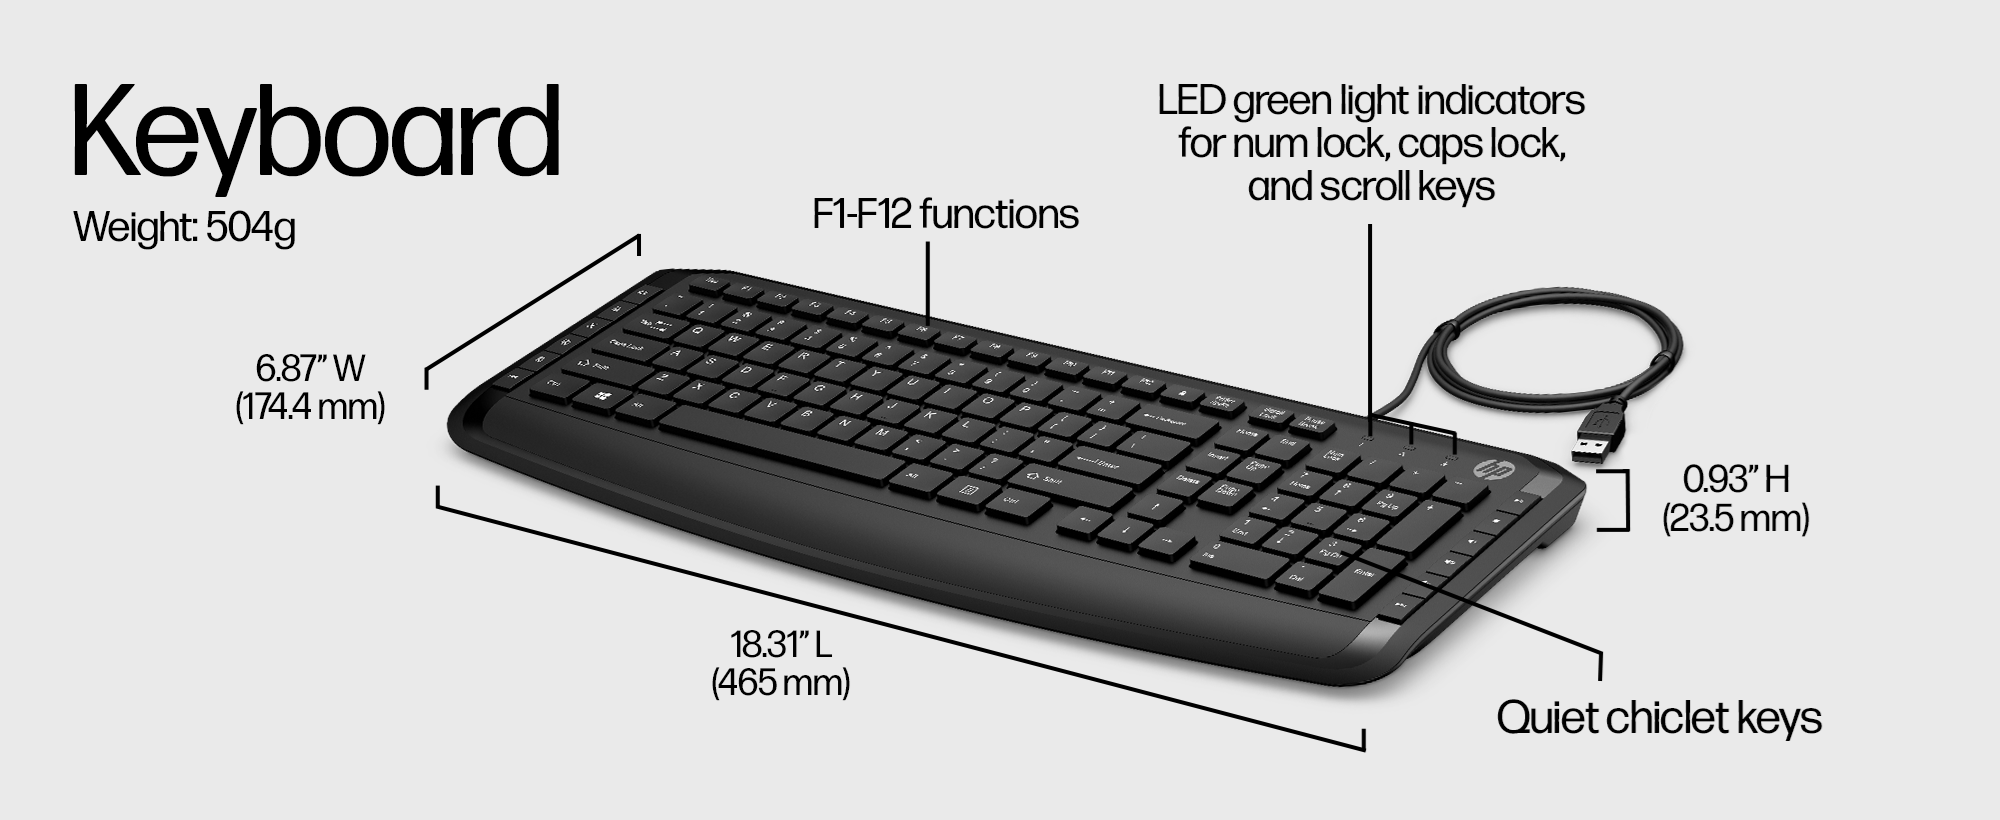 HP Pavilion 200 - keyboard and black mouse - set 9DF28AA#ABL 